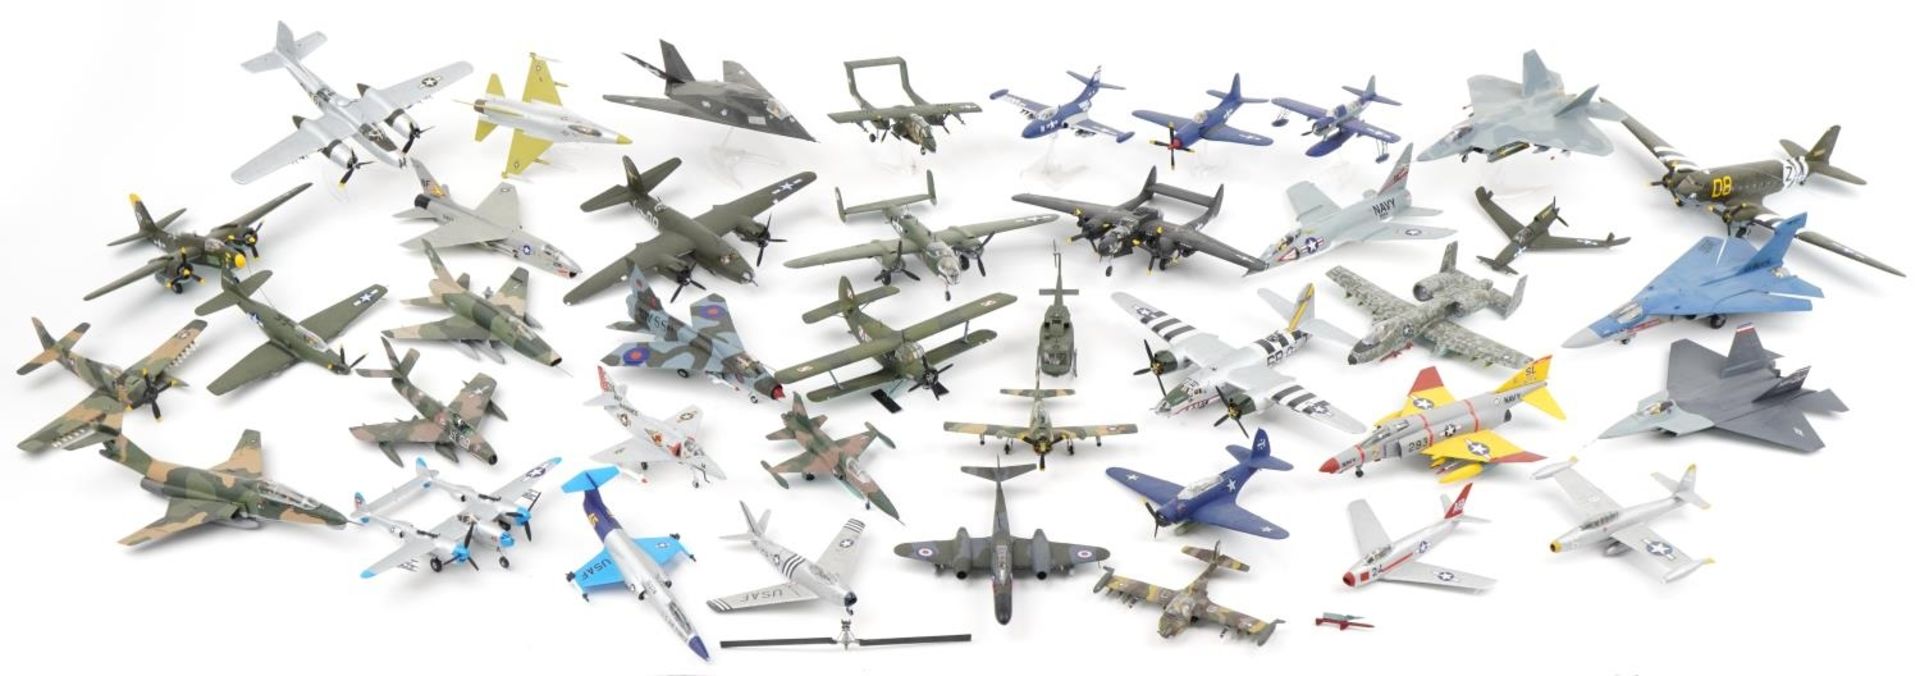 Collection of scratch built model military aircraft, the largest 40cm wide